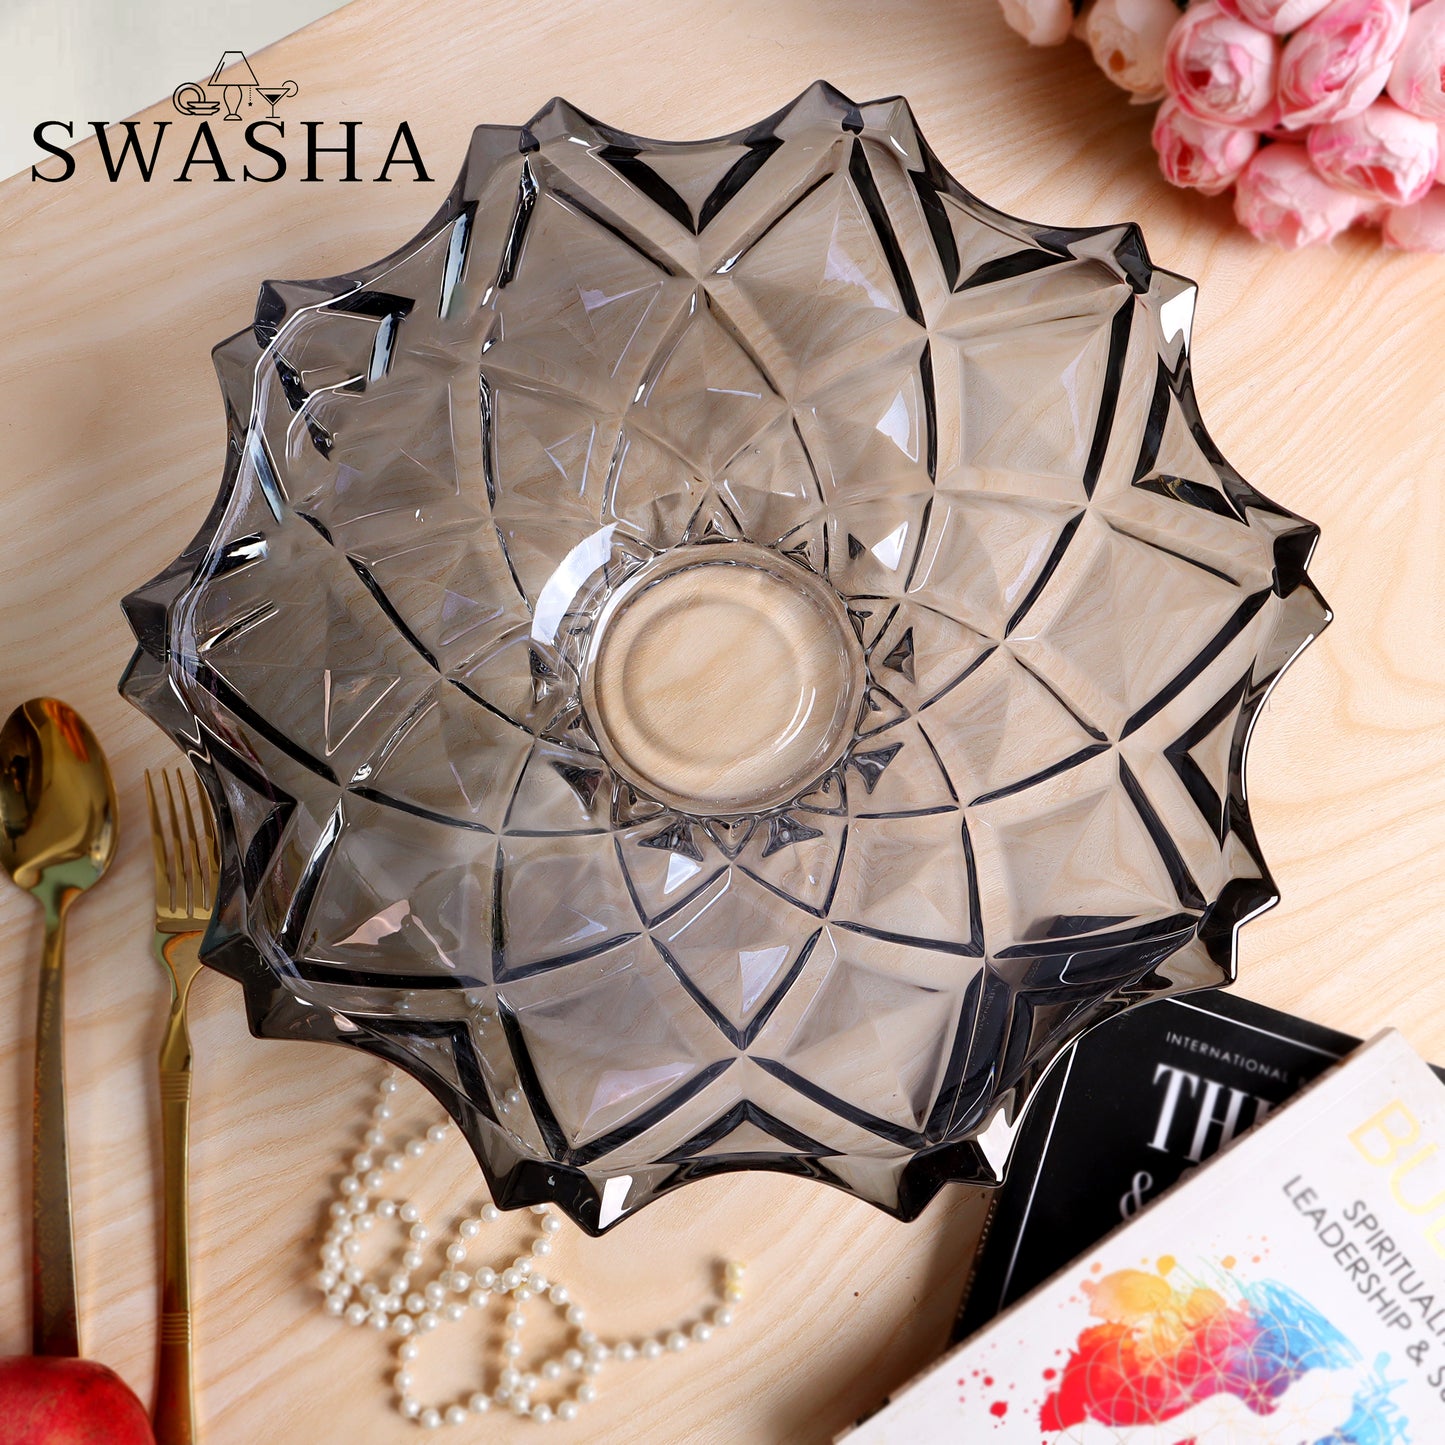 Premium Fruit Bowl With a Black/Brown Hue From Swasha